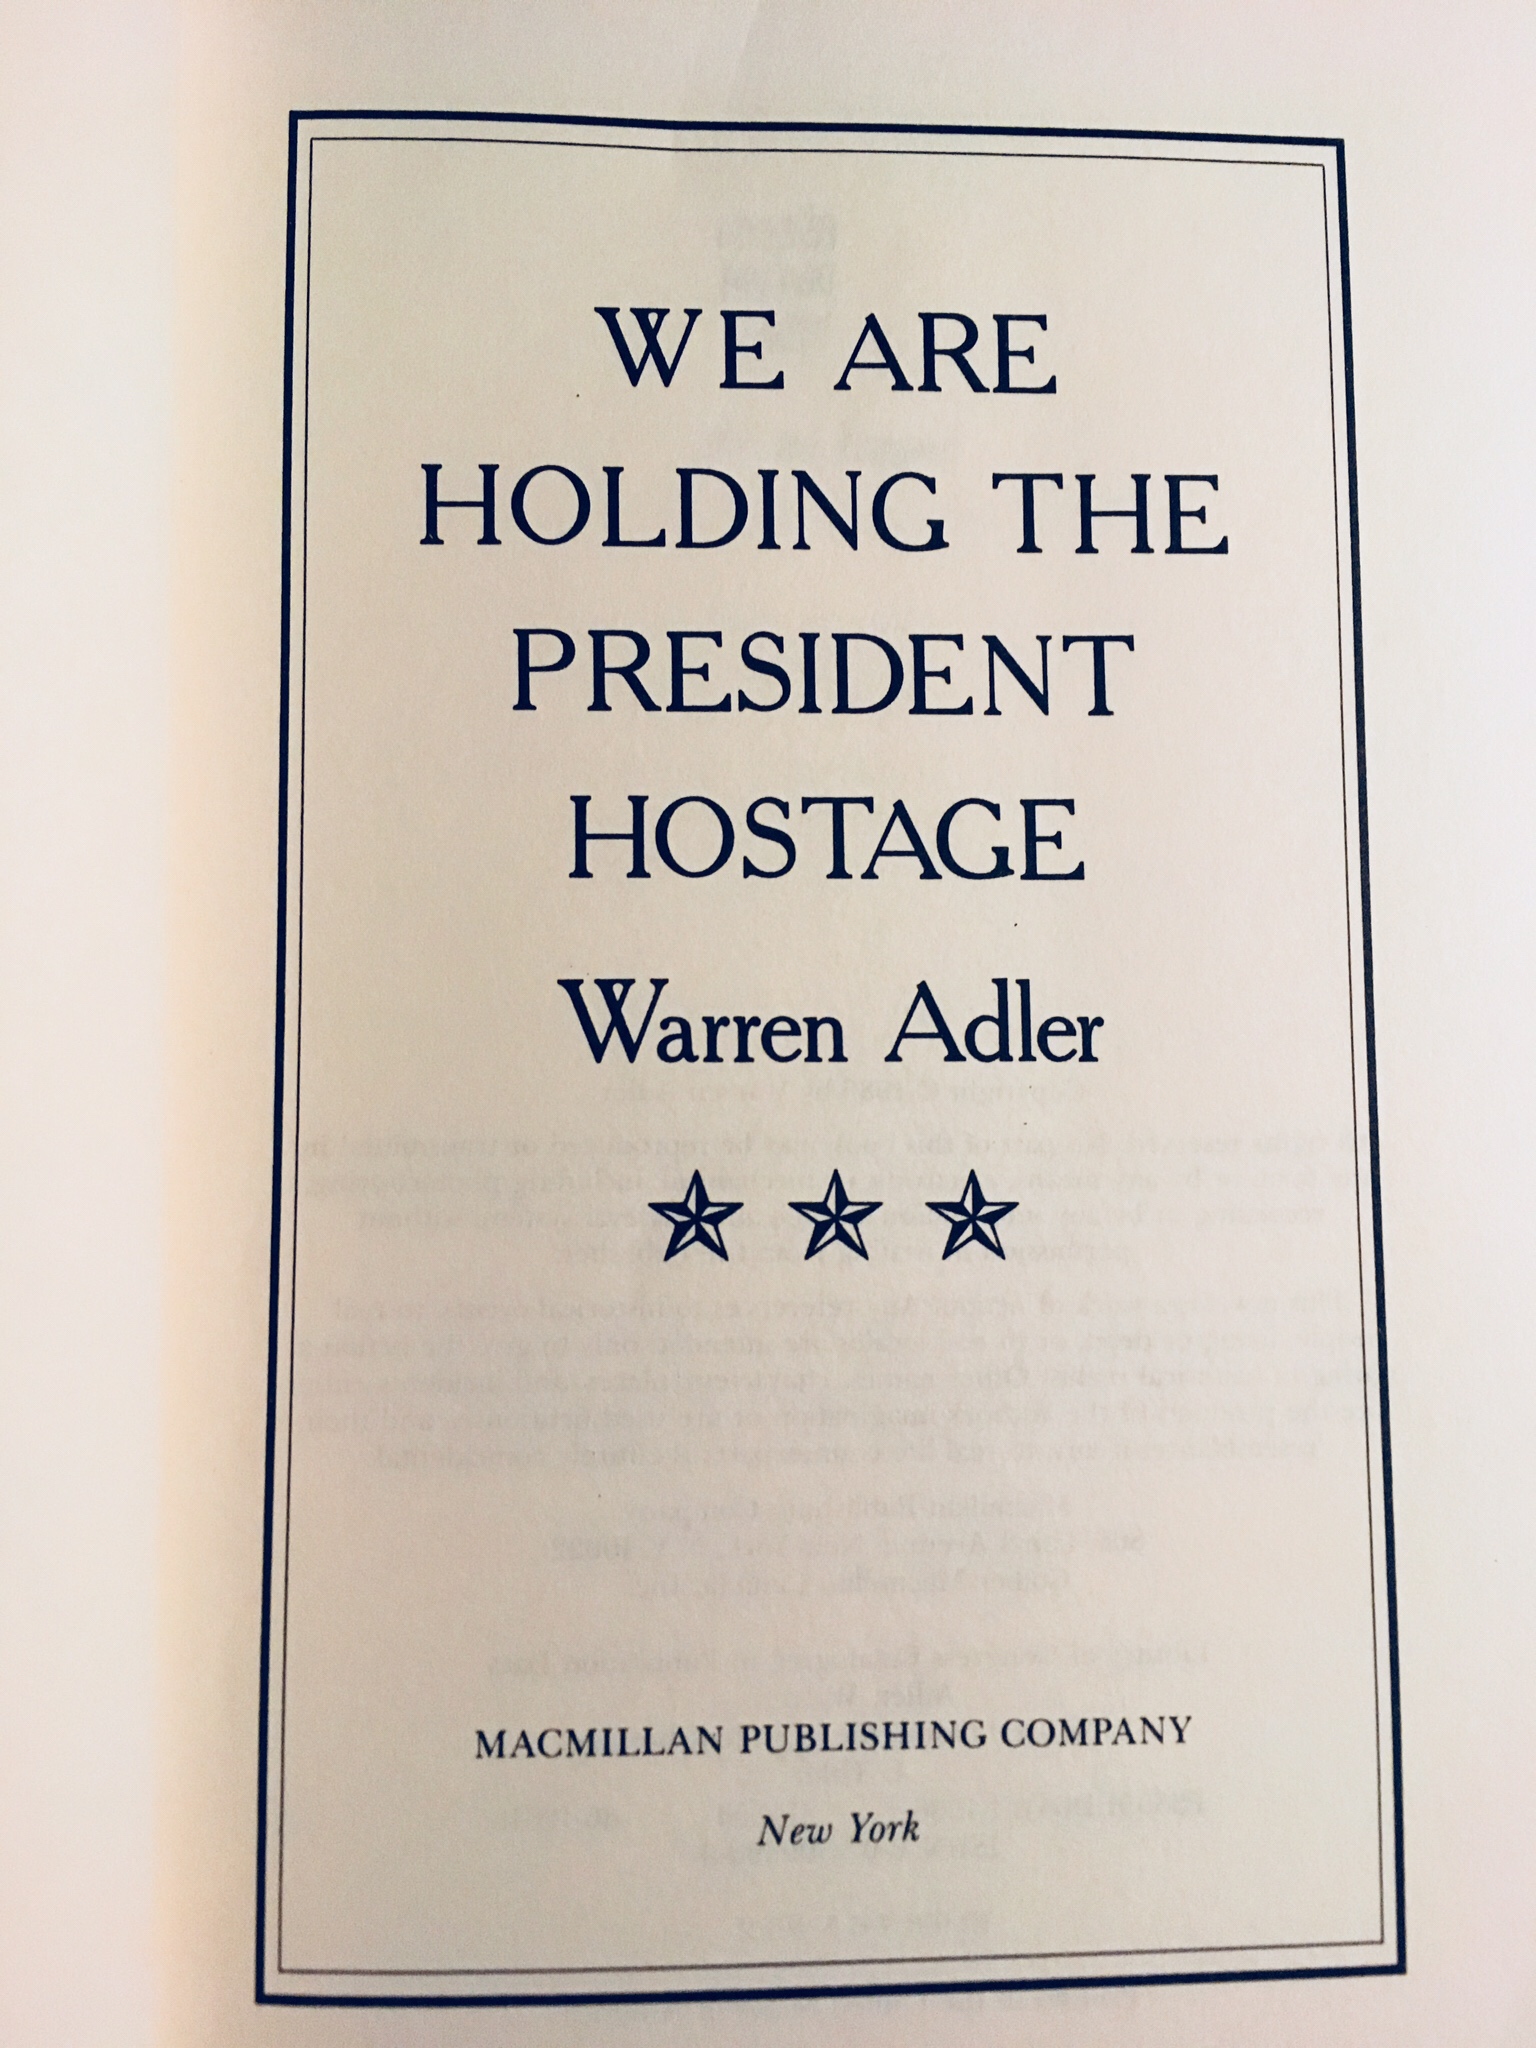 We are holding the President hostage by Warren Adler title page